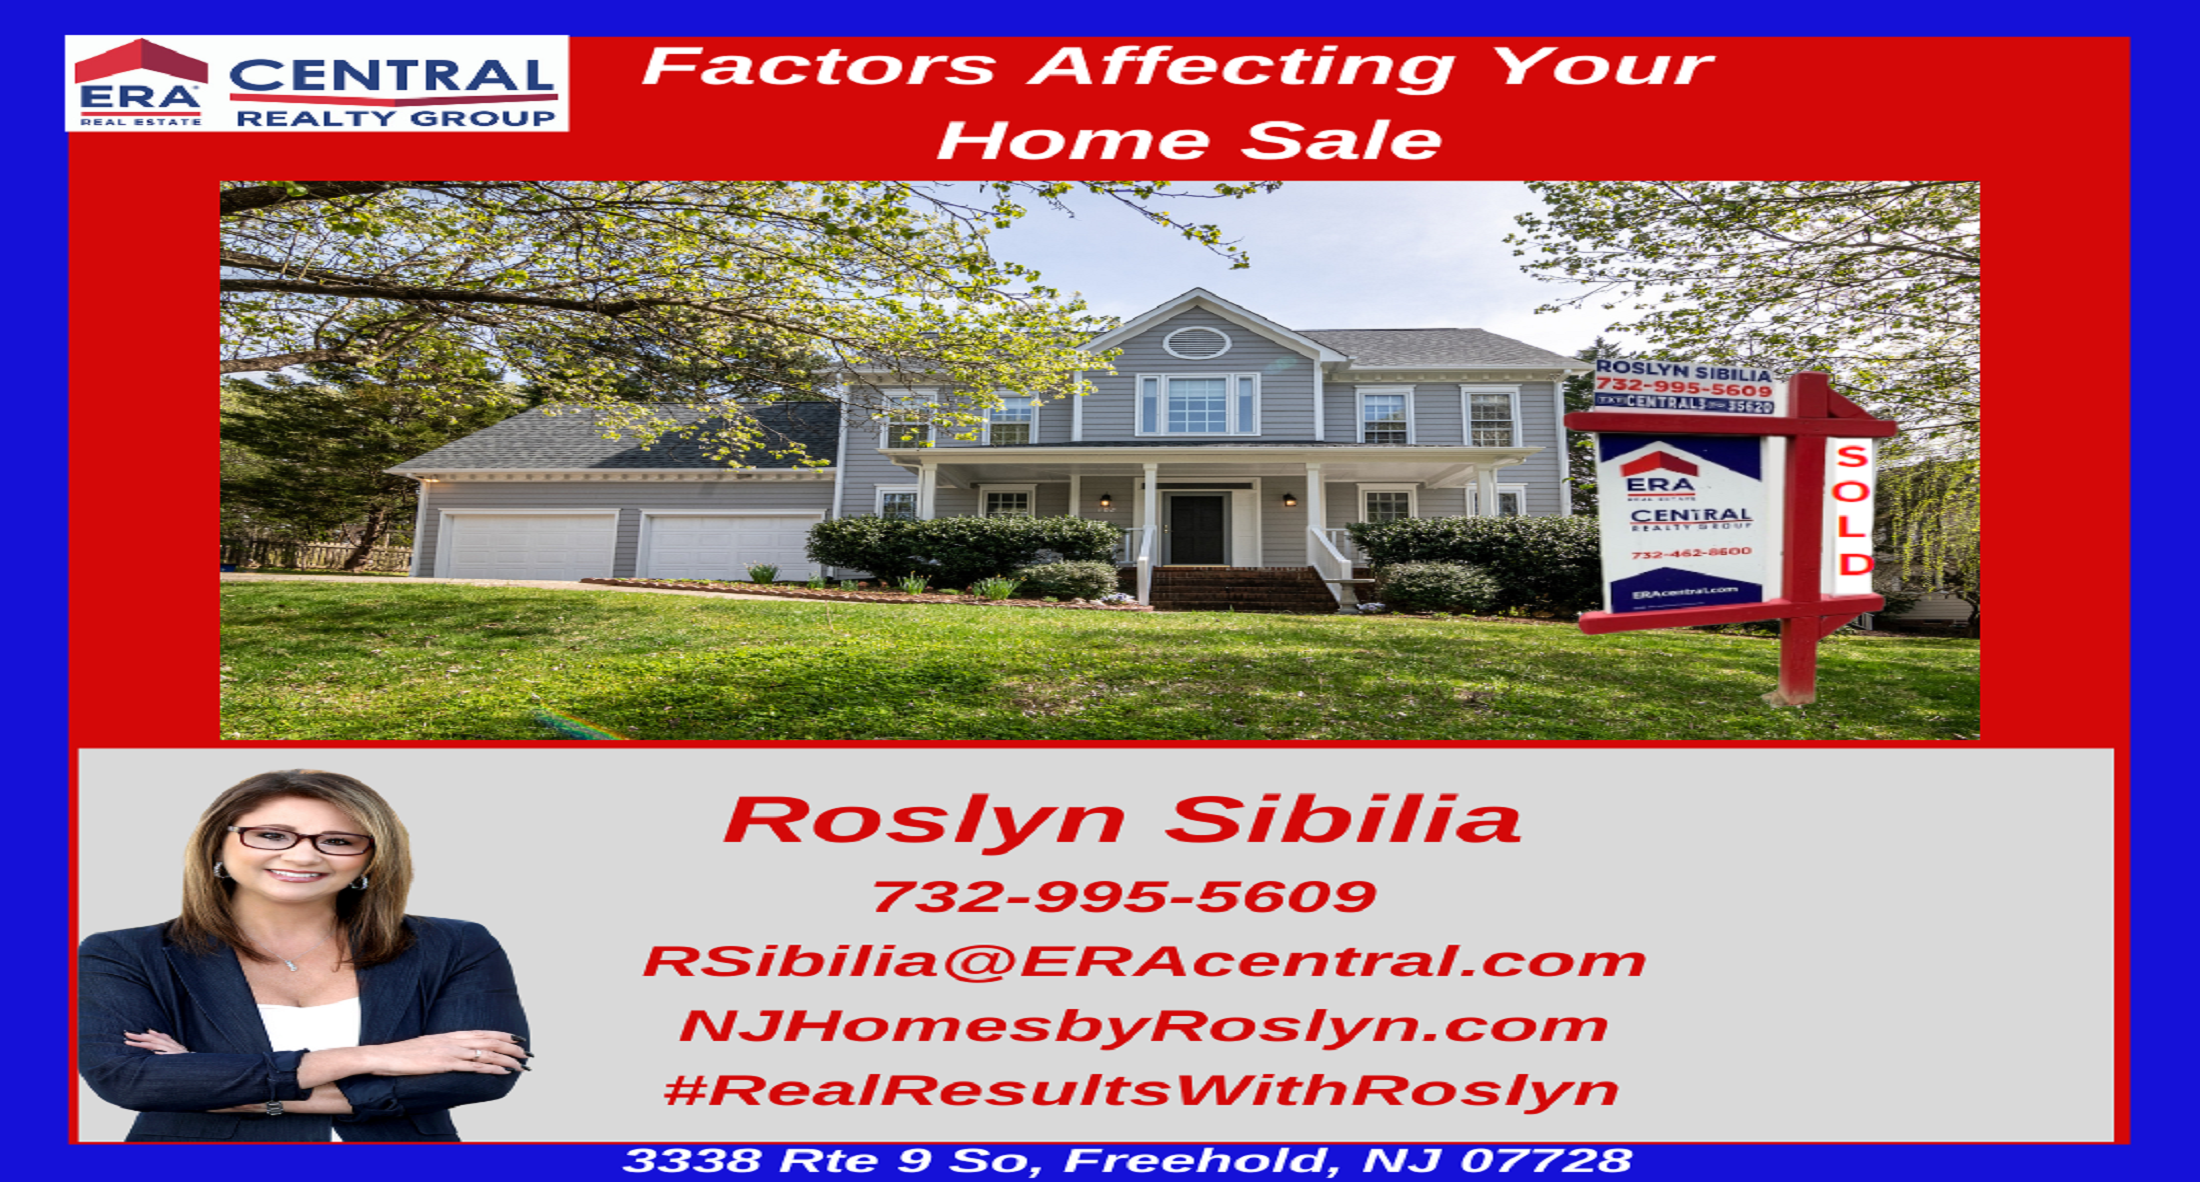 Factors Affecting Your Home Sale